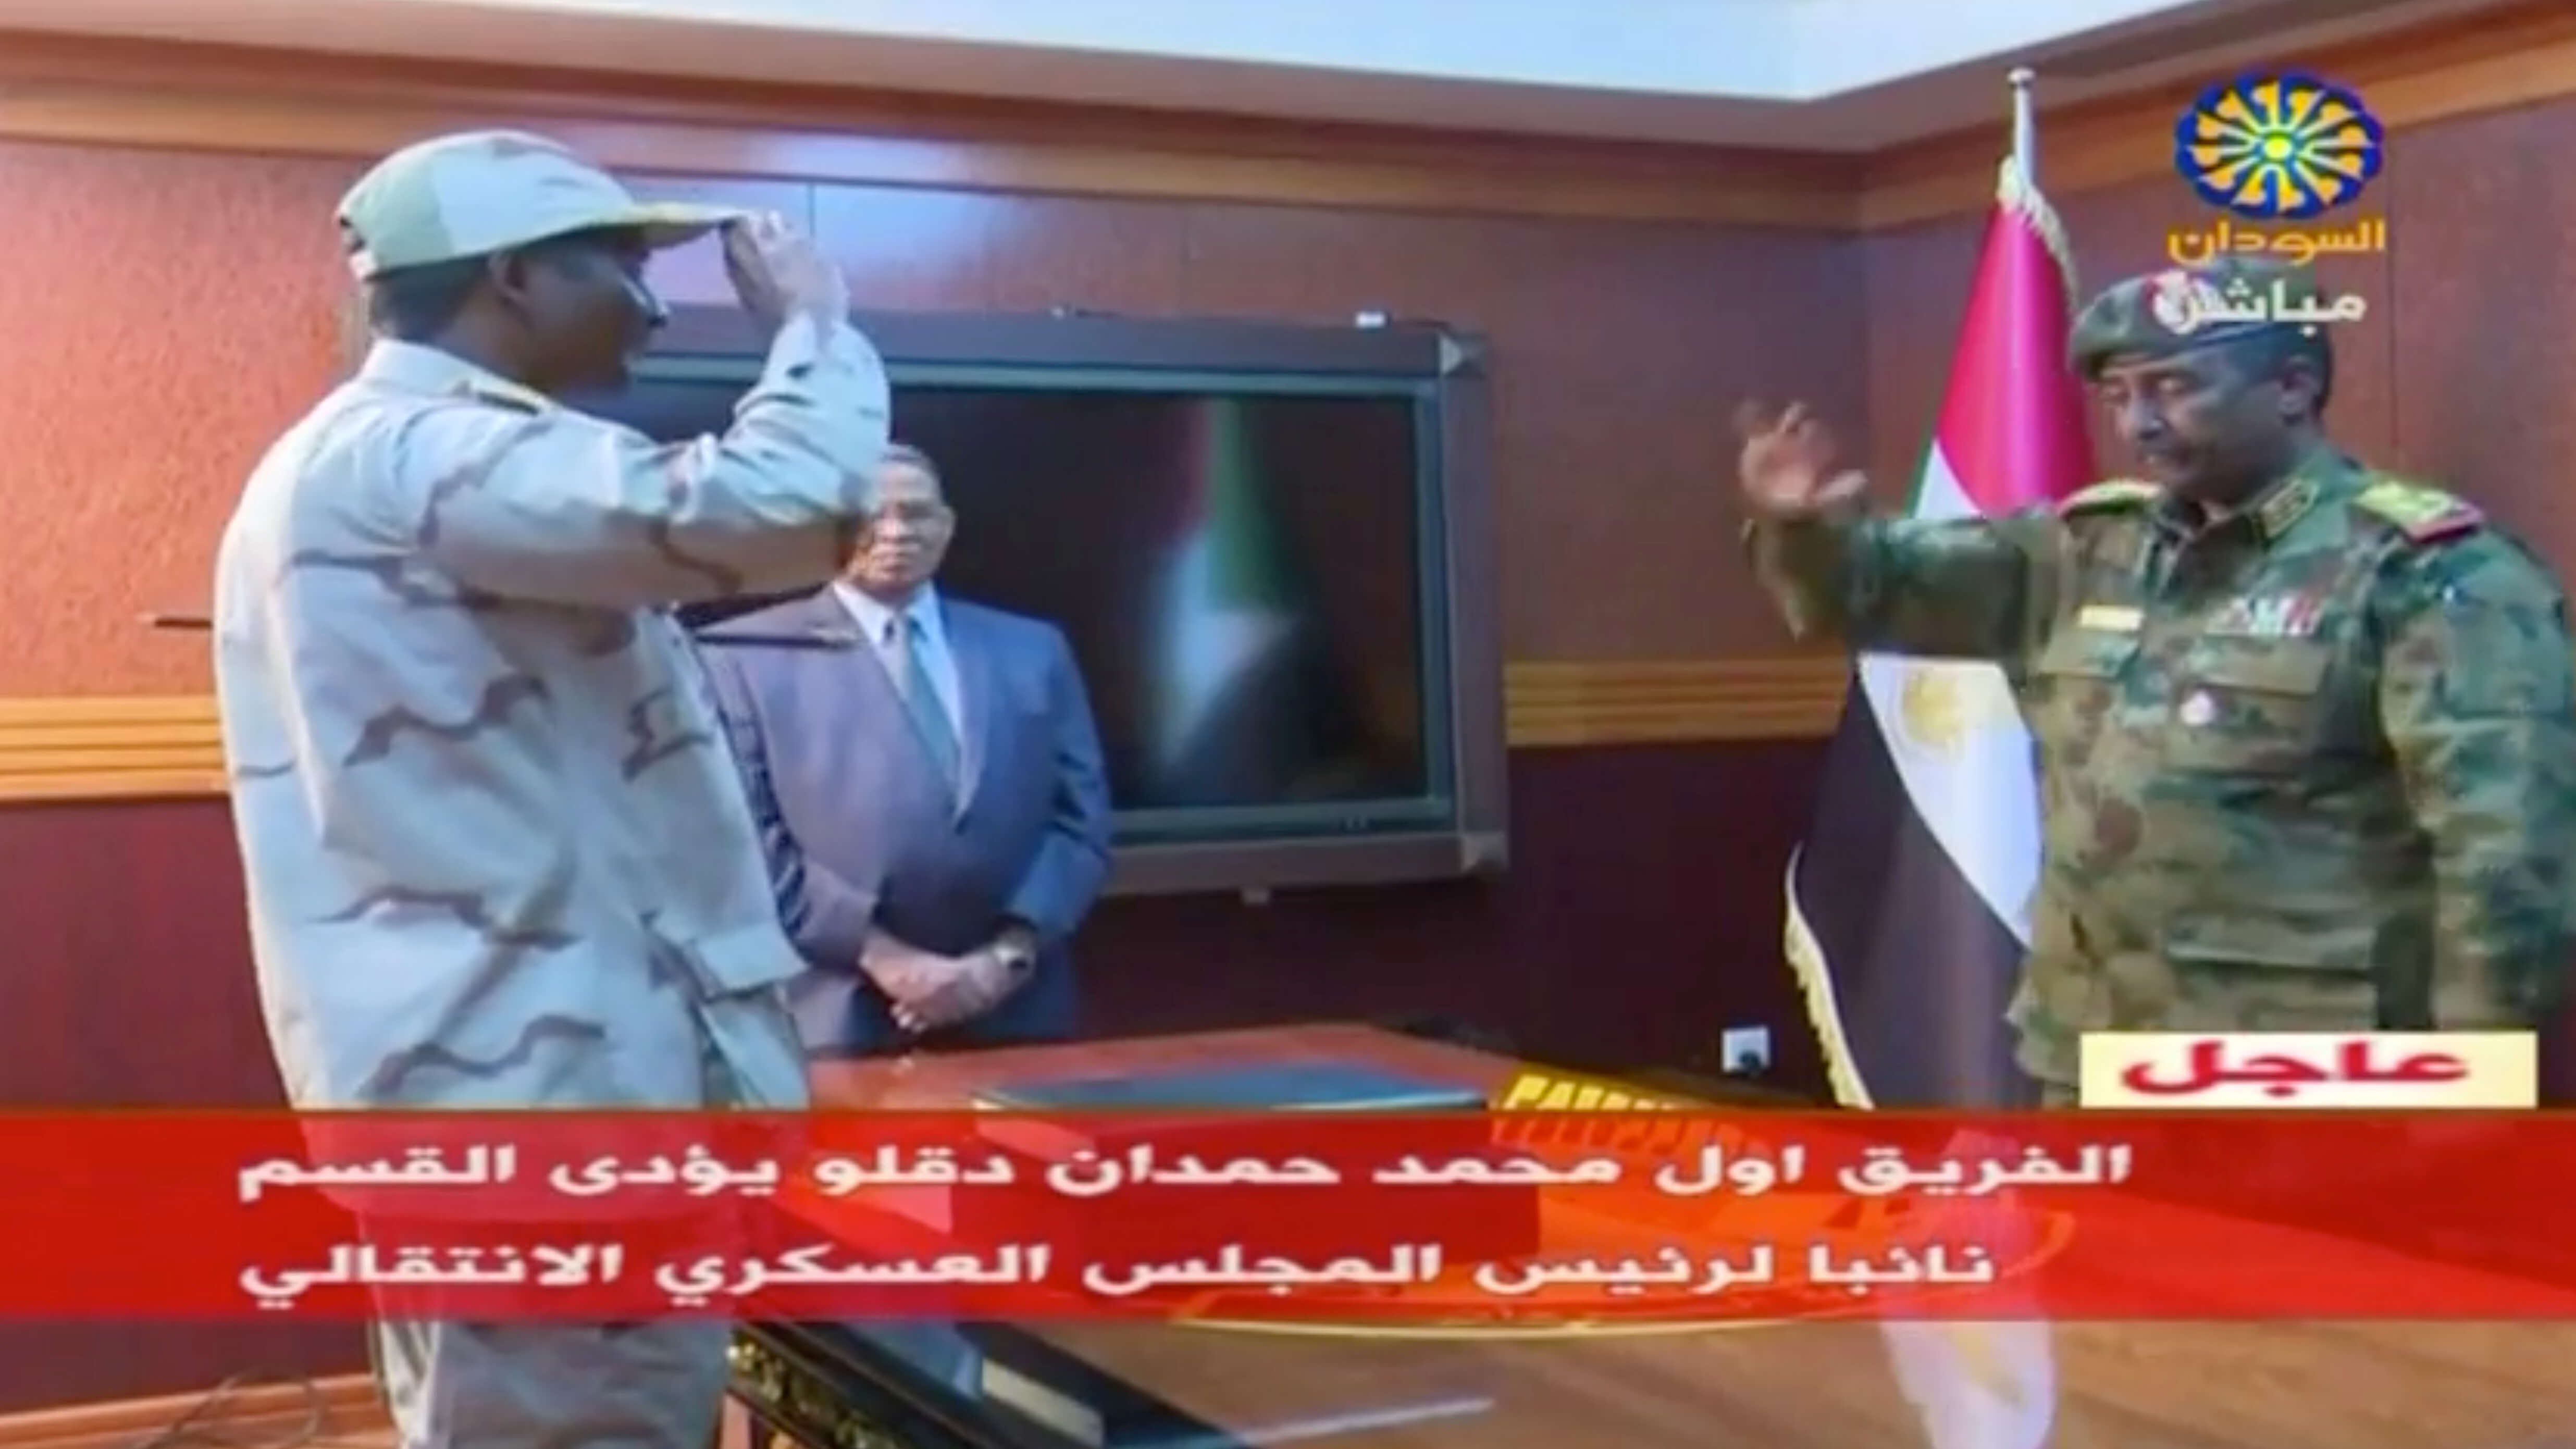 Sudan's general Mohamed Hamdan Dagalo, known as ‘Hemedti’, head of the Rapid Support Forces, is sworn-in as the appointed deputy of Sudan's transitional military council, standing before the head of transitional council, Lieutenant General Abdelfattah al-Burhan Abdelrahman (R) in Khartoum, Sudan on 13 April 2019. © Reuters